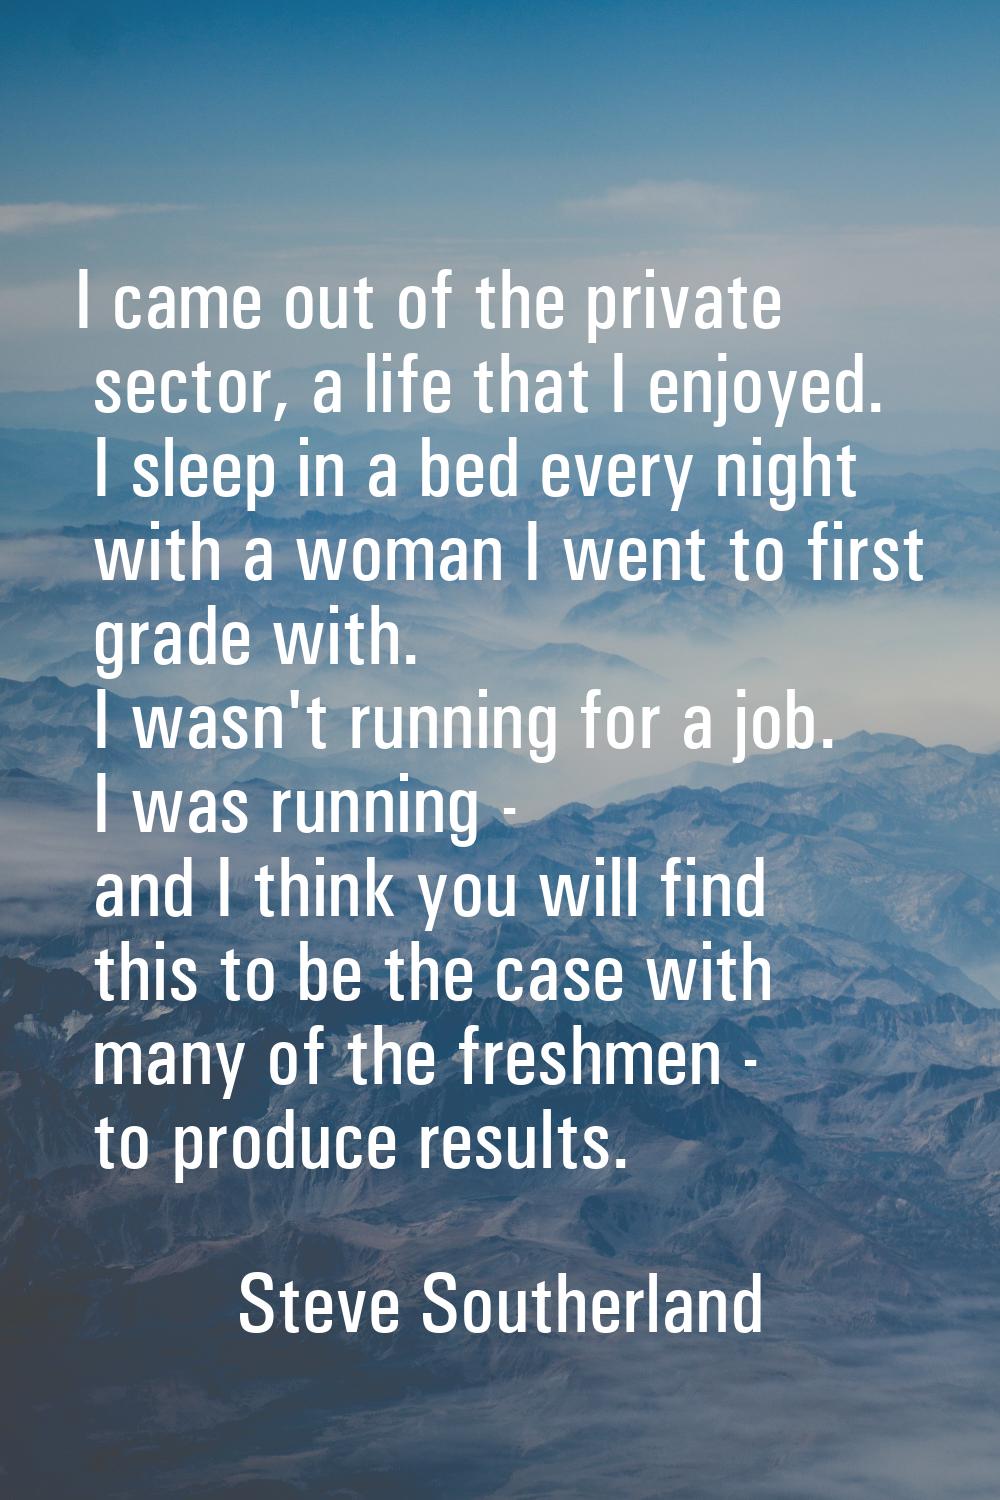 I came out of the private sector, a life that I enjoyed. I sleep in a bed every night with a woman 